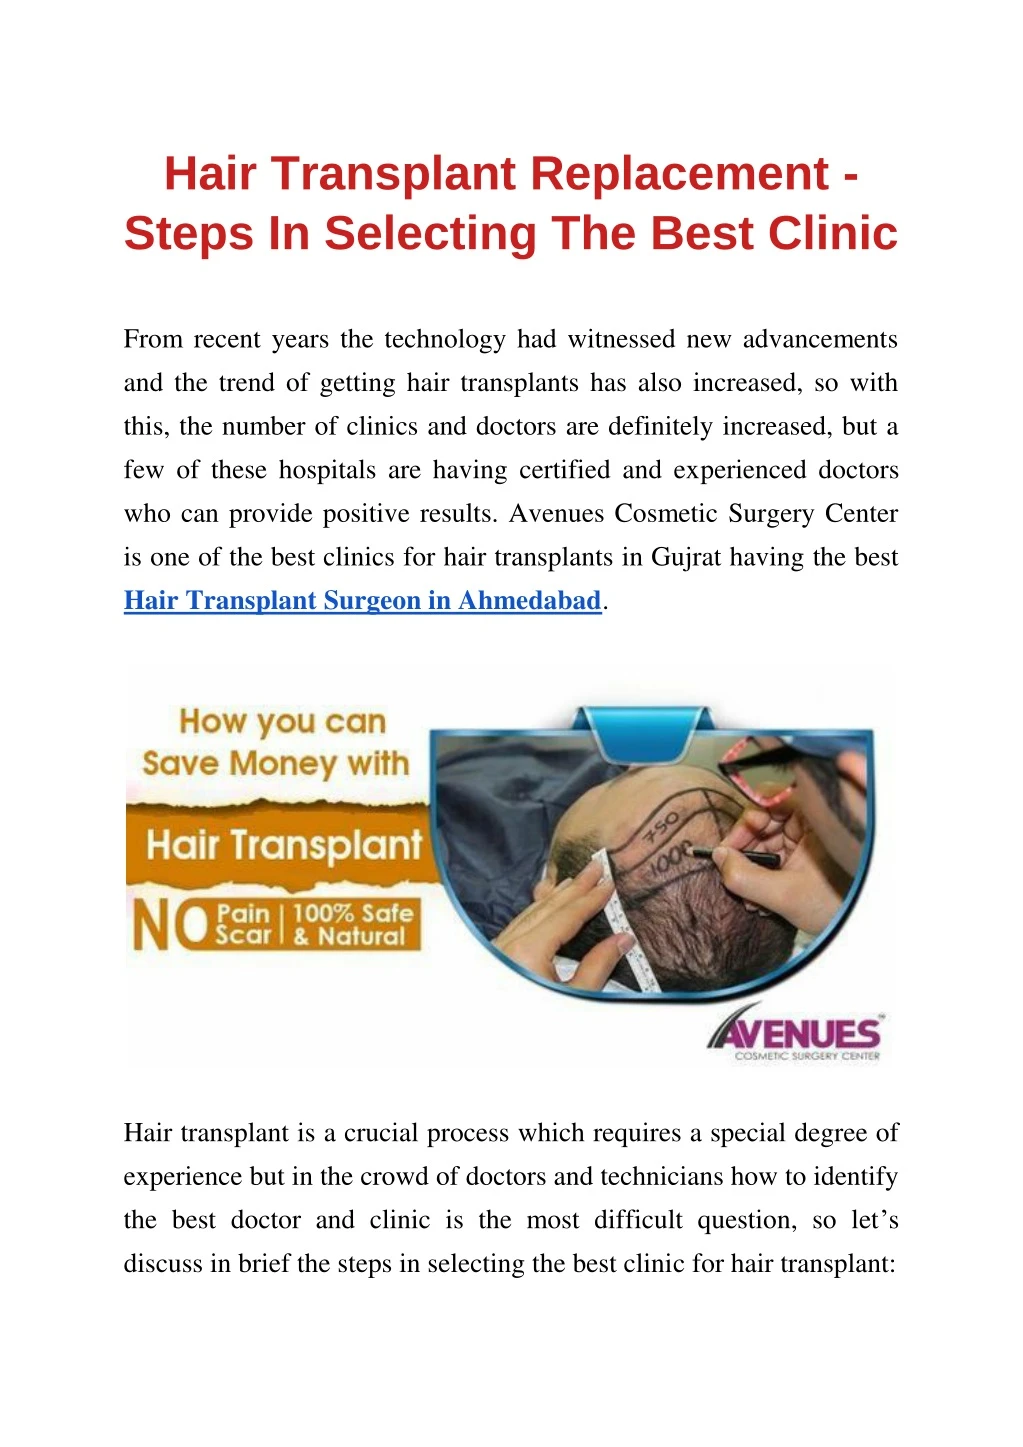 hair transplant replacement steps in selecting